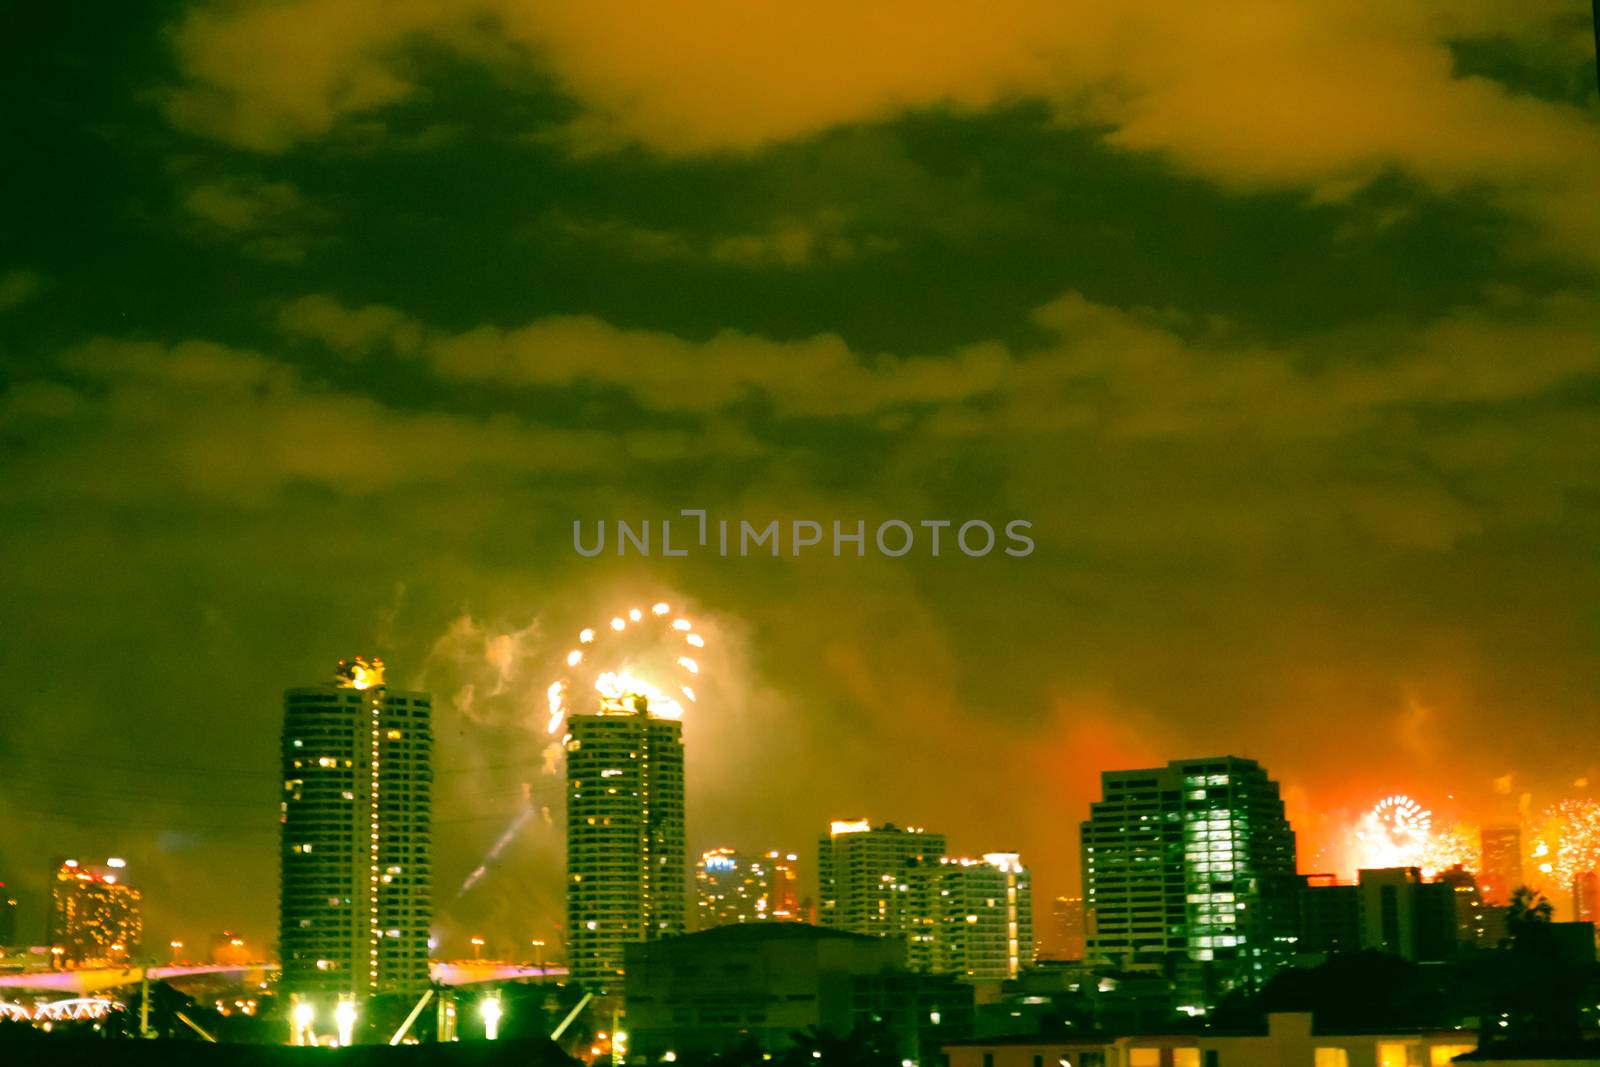 Fireworks display over the Bangkok city in Thailand.